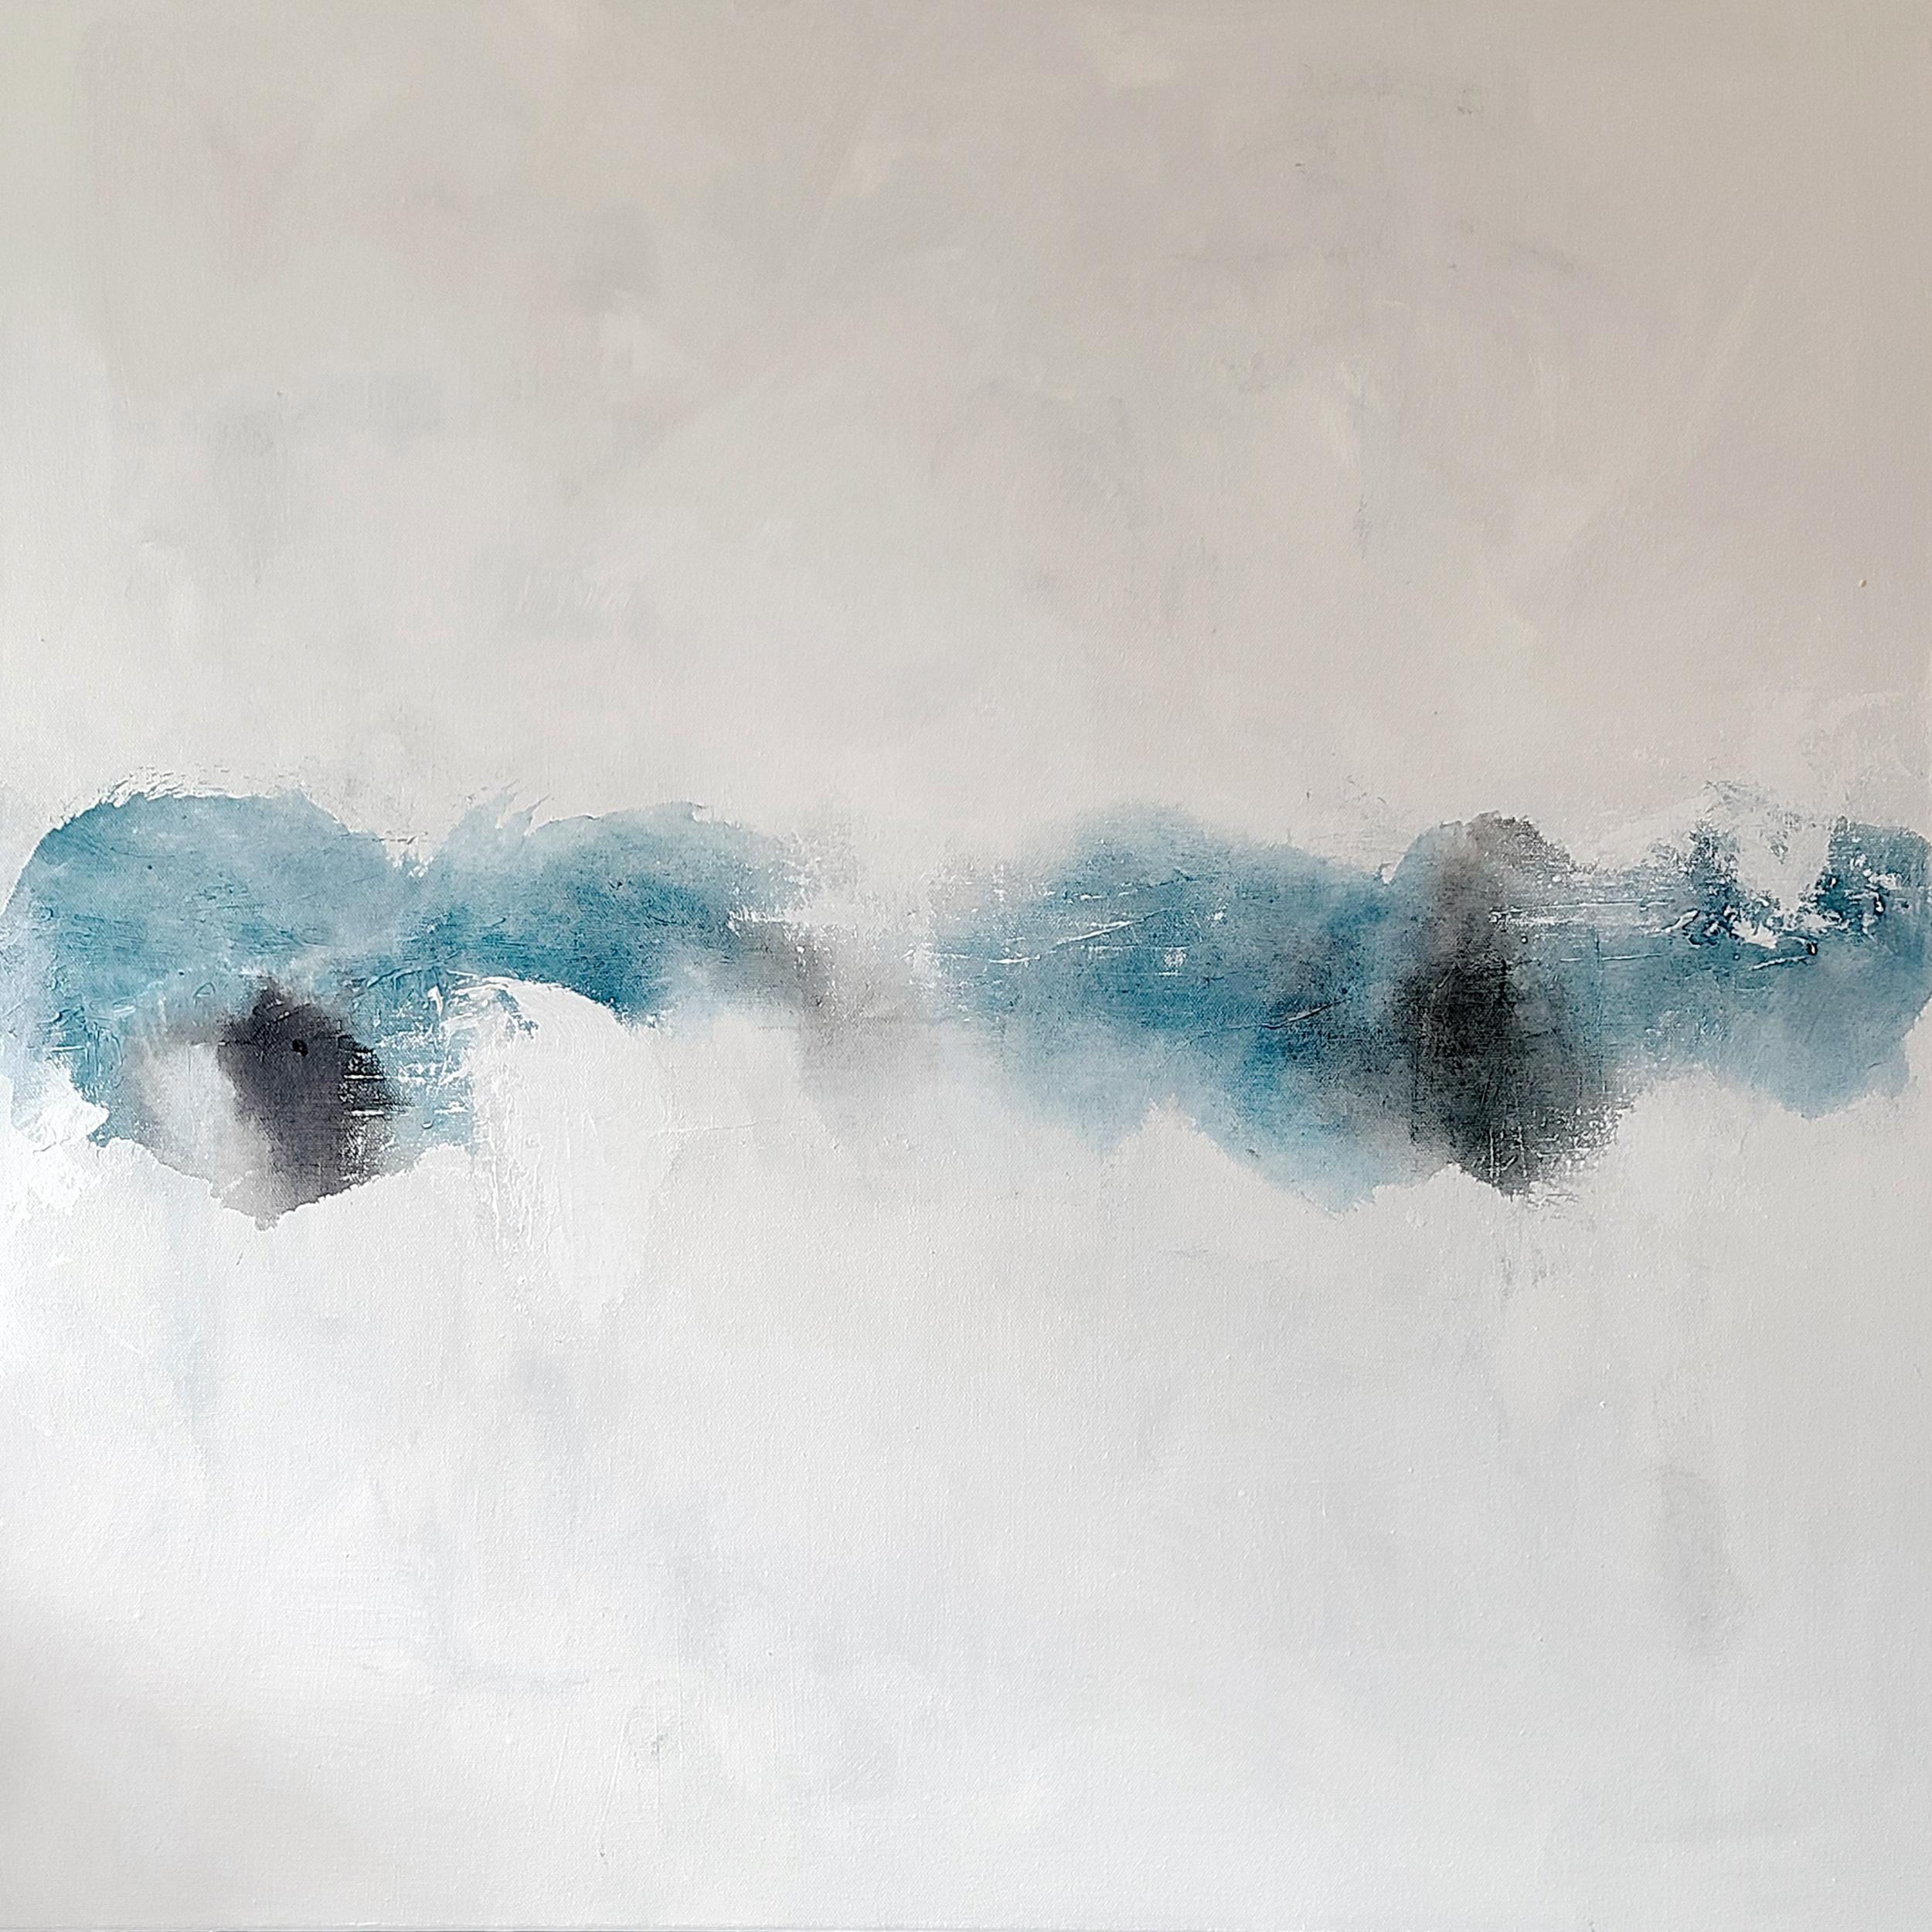 Soften My Edges, Original Contemporary Minimalist Abstract Painting, 2022
30" x 30" x 0.5" (HxWxD) Acrylic on Canvas
Hand-signed by the artist in verso.

A simple and minimal large format abstract painting by artist KR Moehr, this work modern